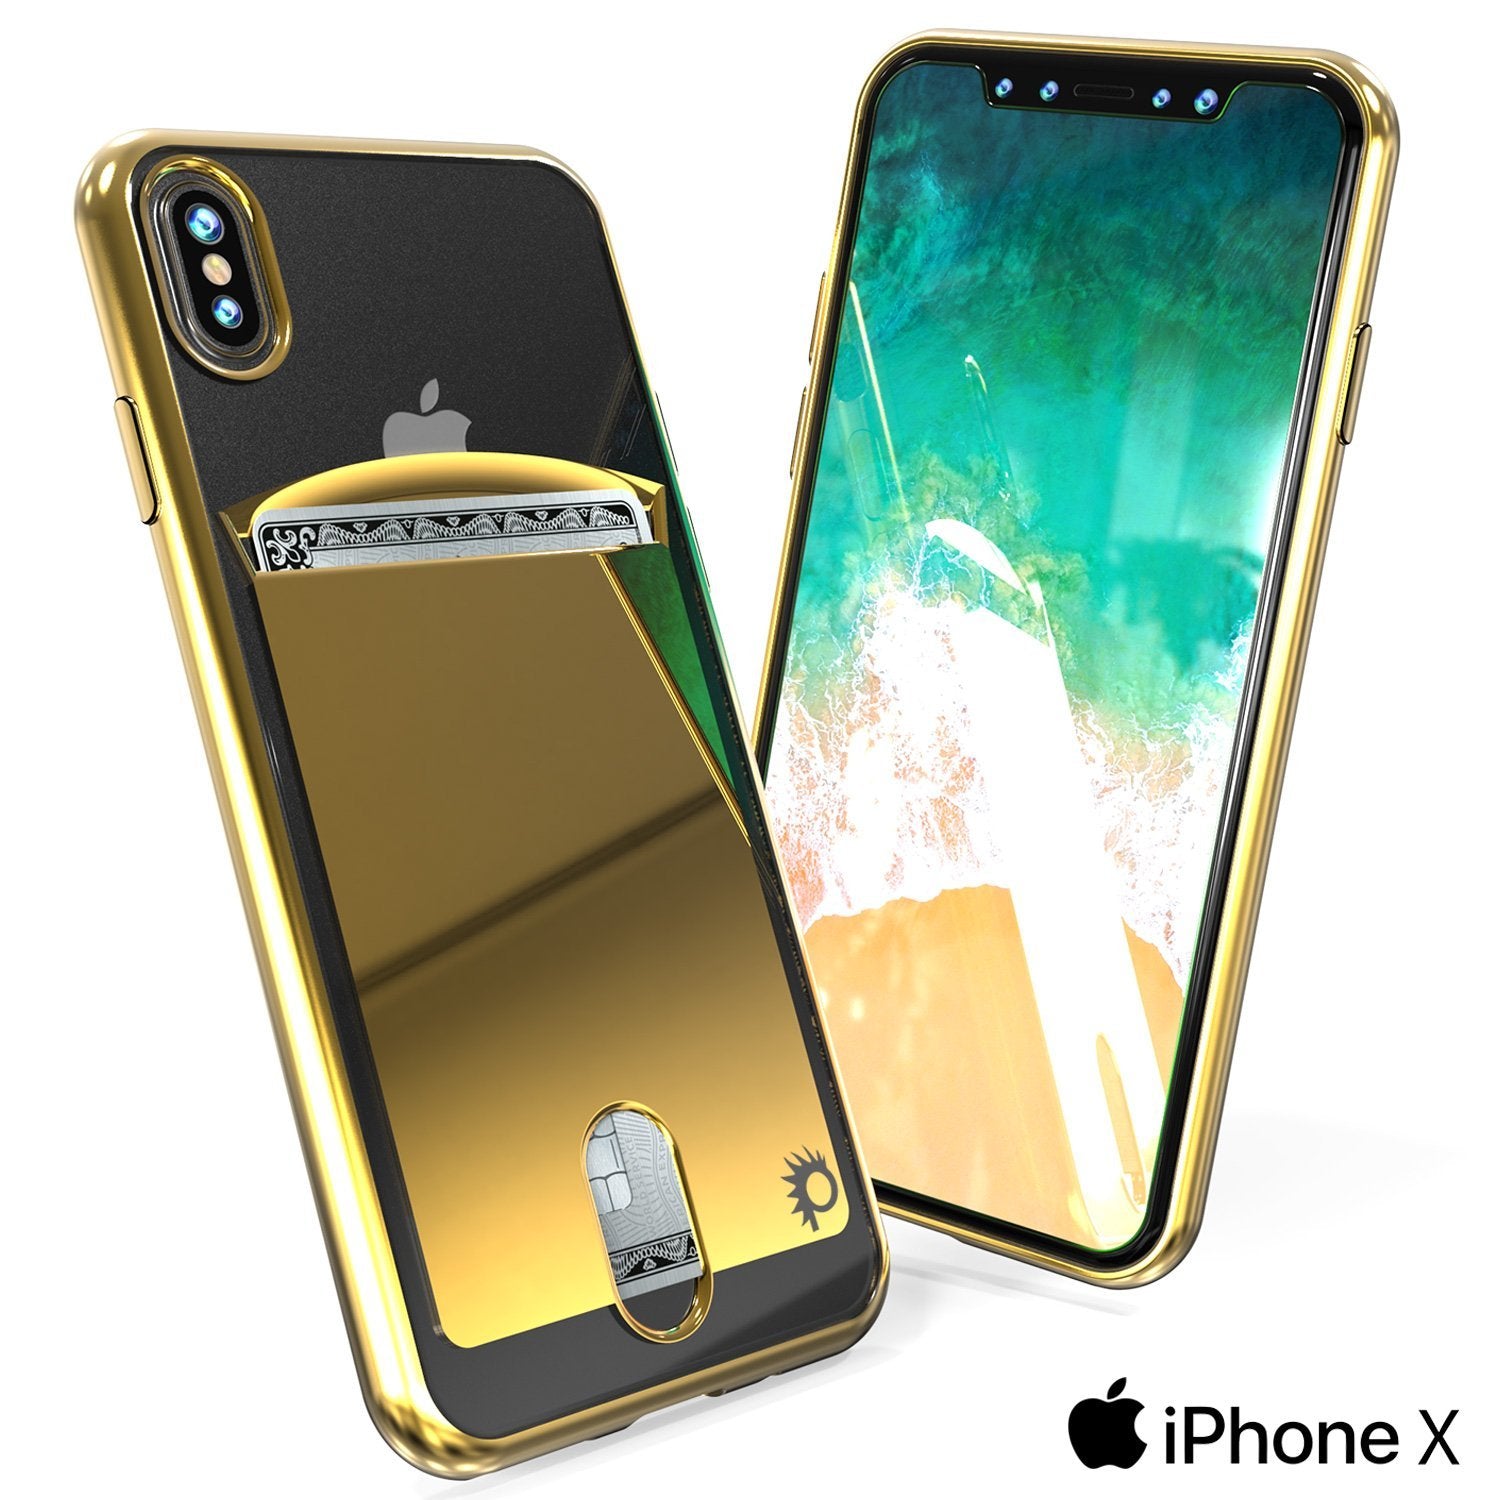 iPhone X Case, PUNKcase [LUCID Series] Slim Fit Protective Dual Layer Armor Cover W/ Scratch Resistant PUNKSHIELD Screen Protector [GOLD]